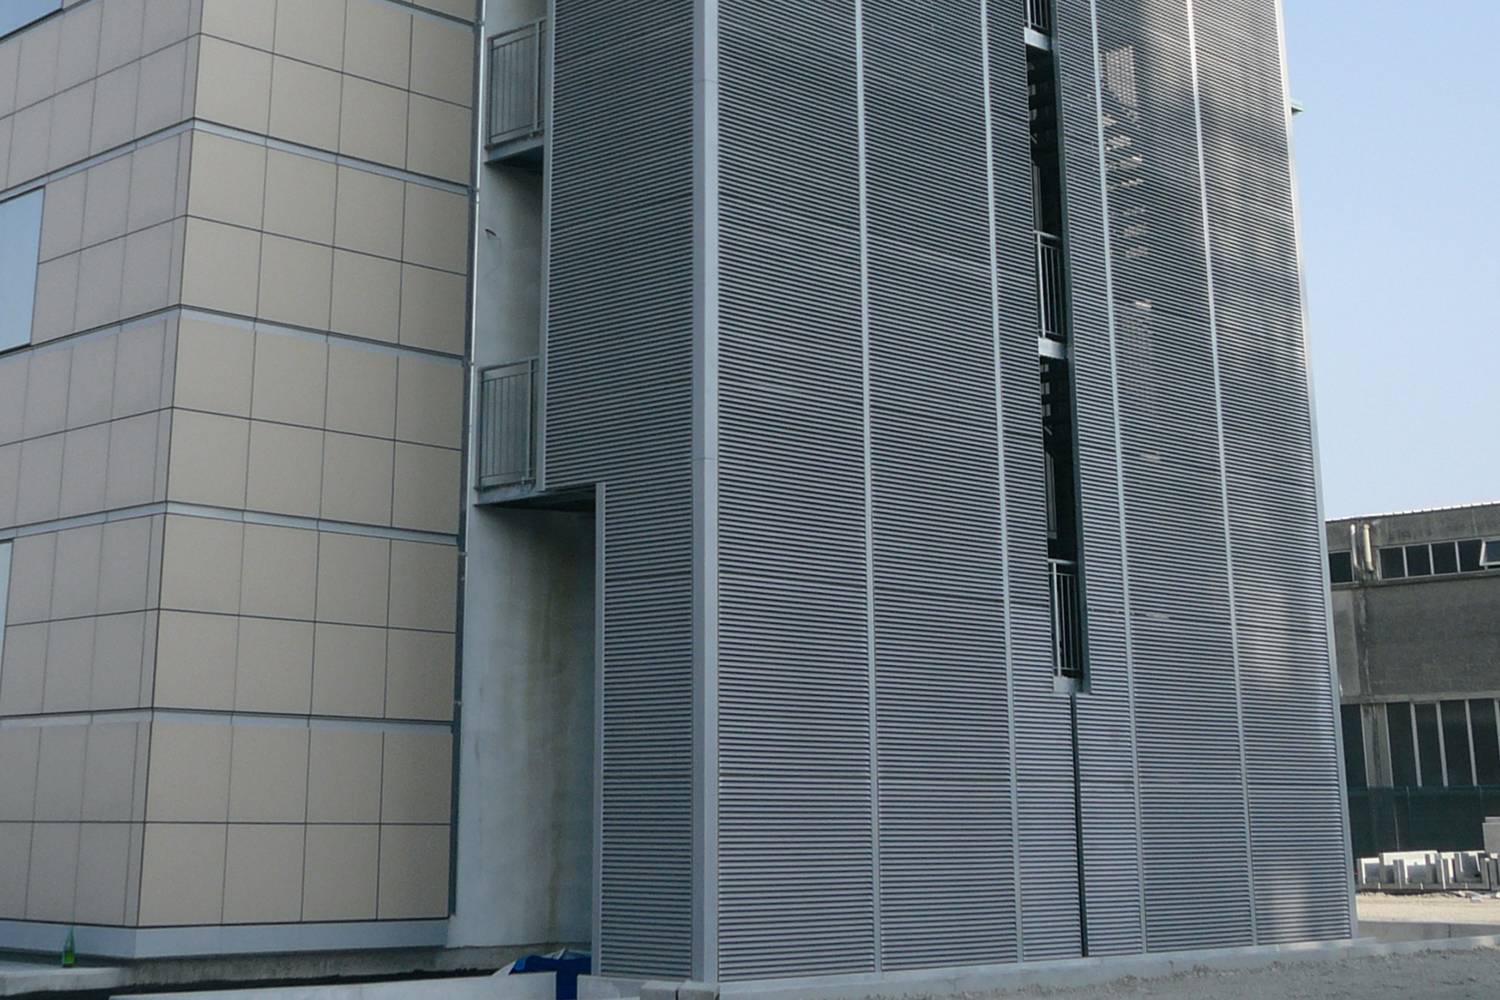 Italia-80 Cladding and Screening - Steel Louvre Protective Privacy Screen